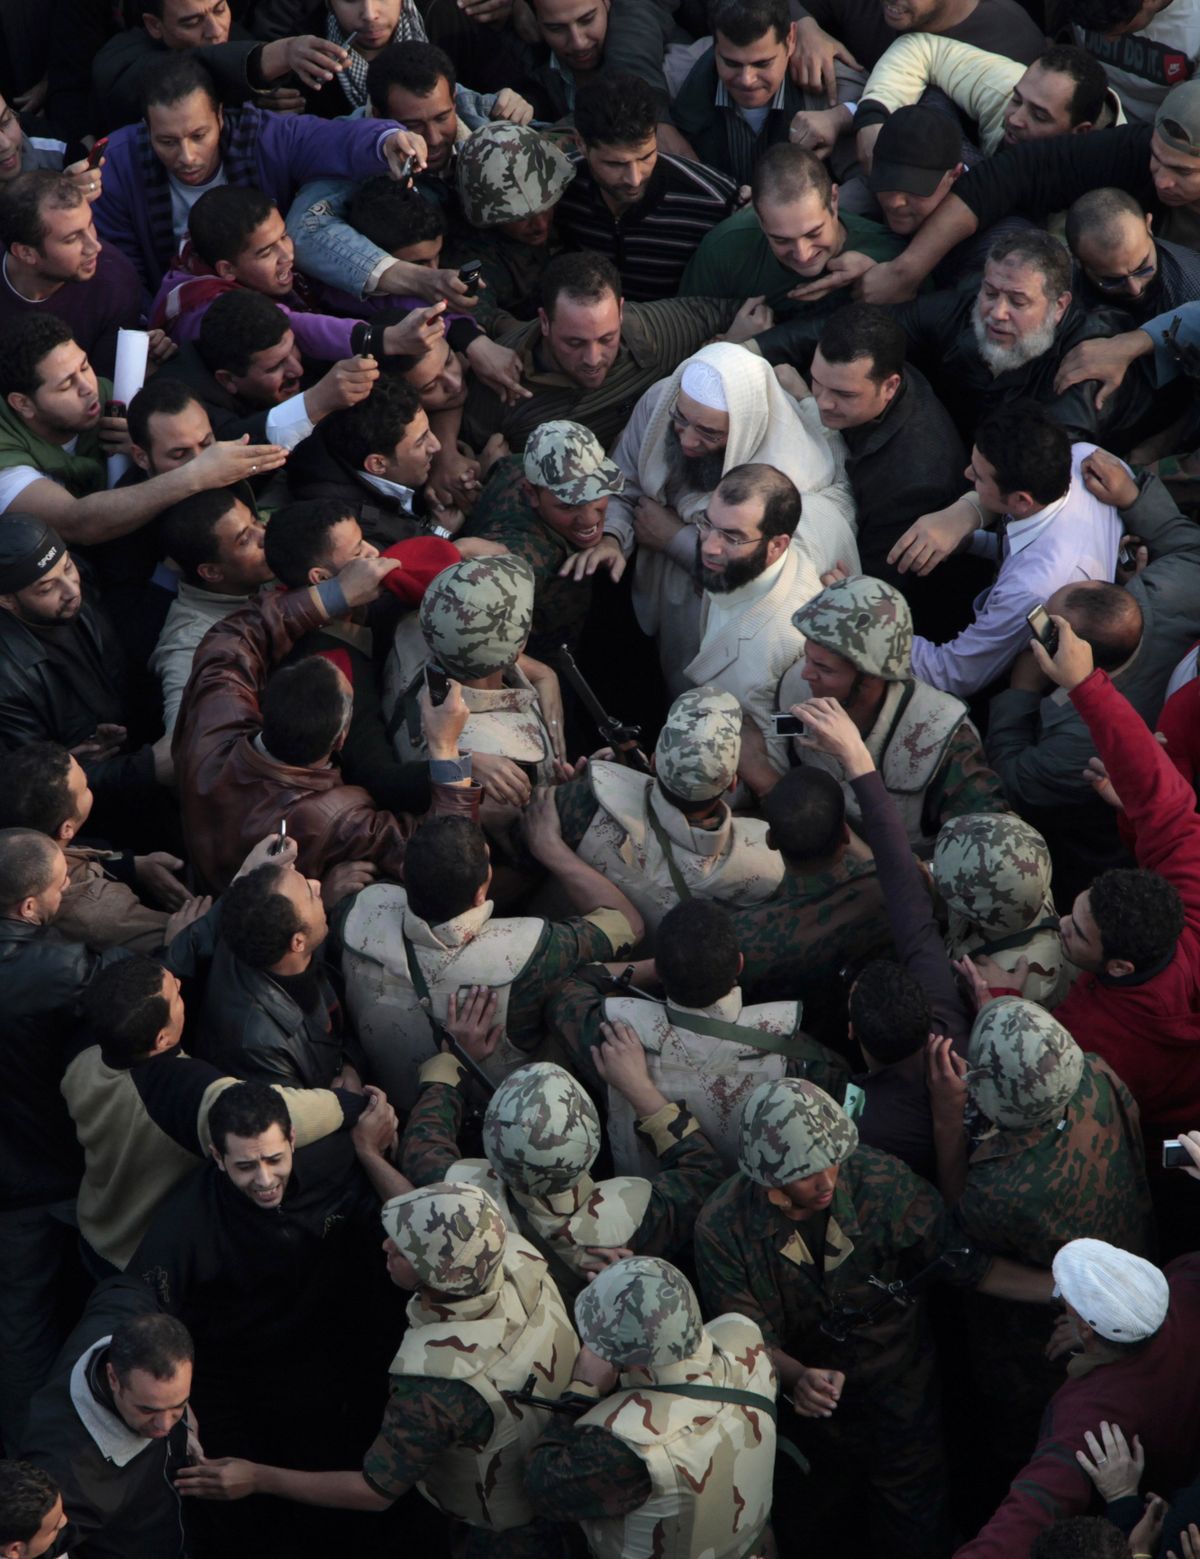 Soldiers surround an unidentified Muslim cleric, center in white, in Tahrir, or Liberation, Square in Cairo, Egypt, Tuesday, Feb. 1, 2011.  (Lefteris Pitarakis / Associated Press)